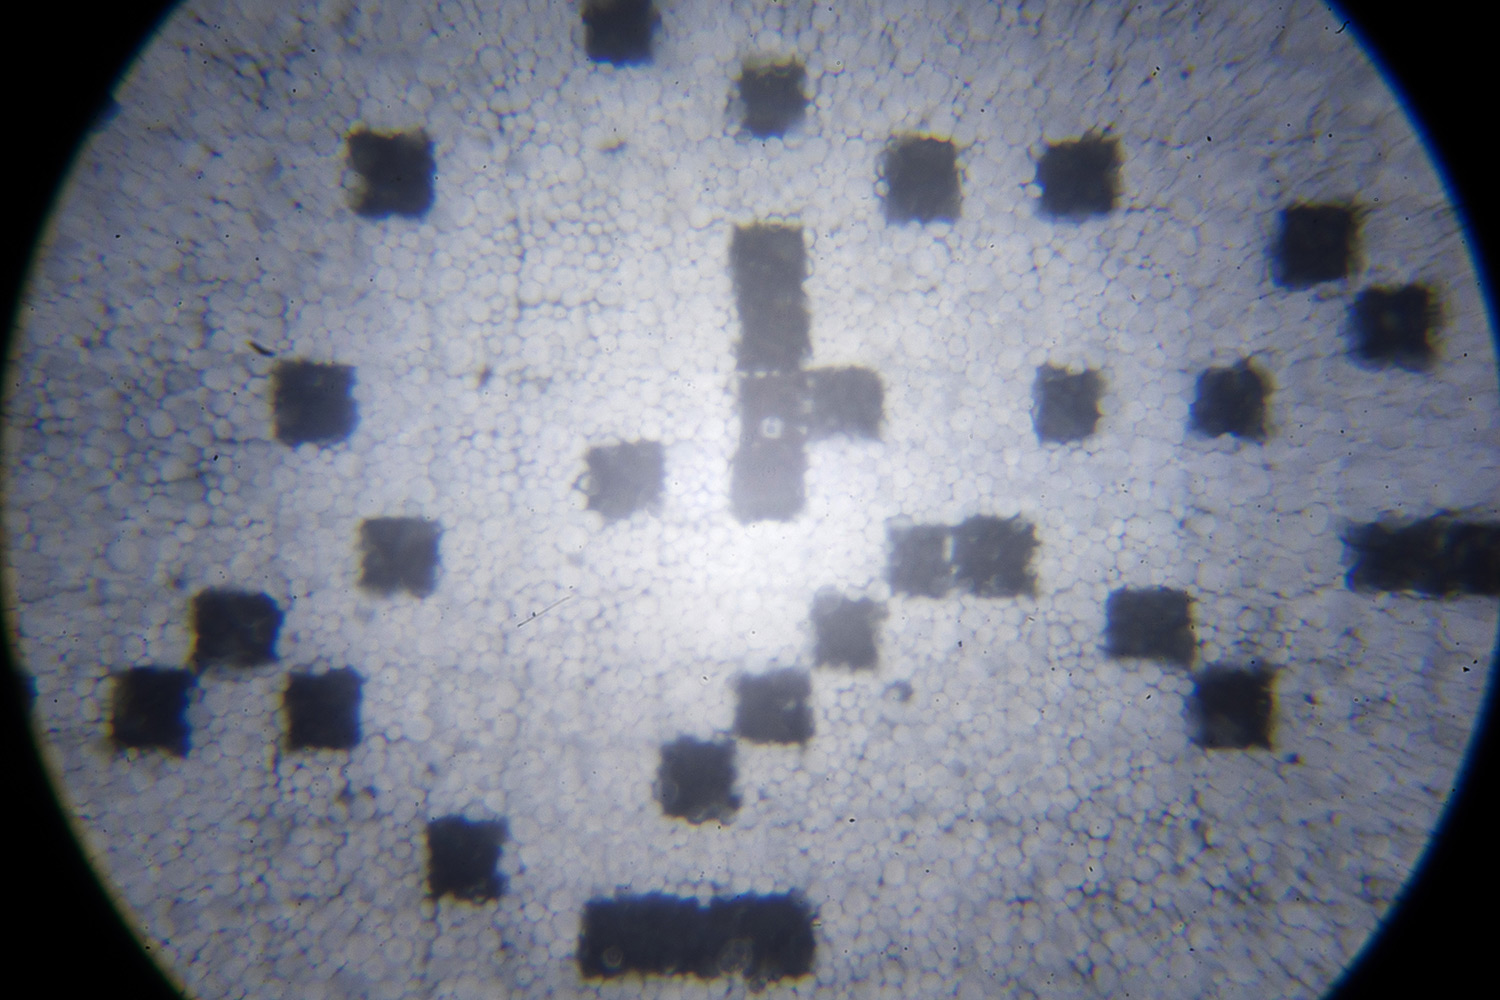 microscopic view of e-ink screen revealing black and white pixels consisting of multiple irregular small spheres